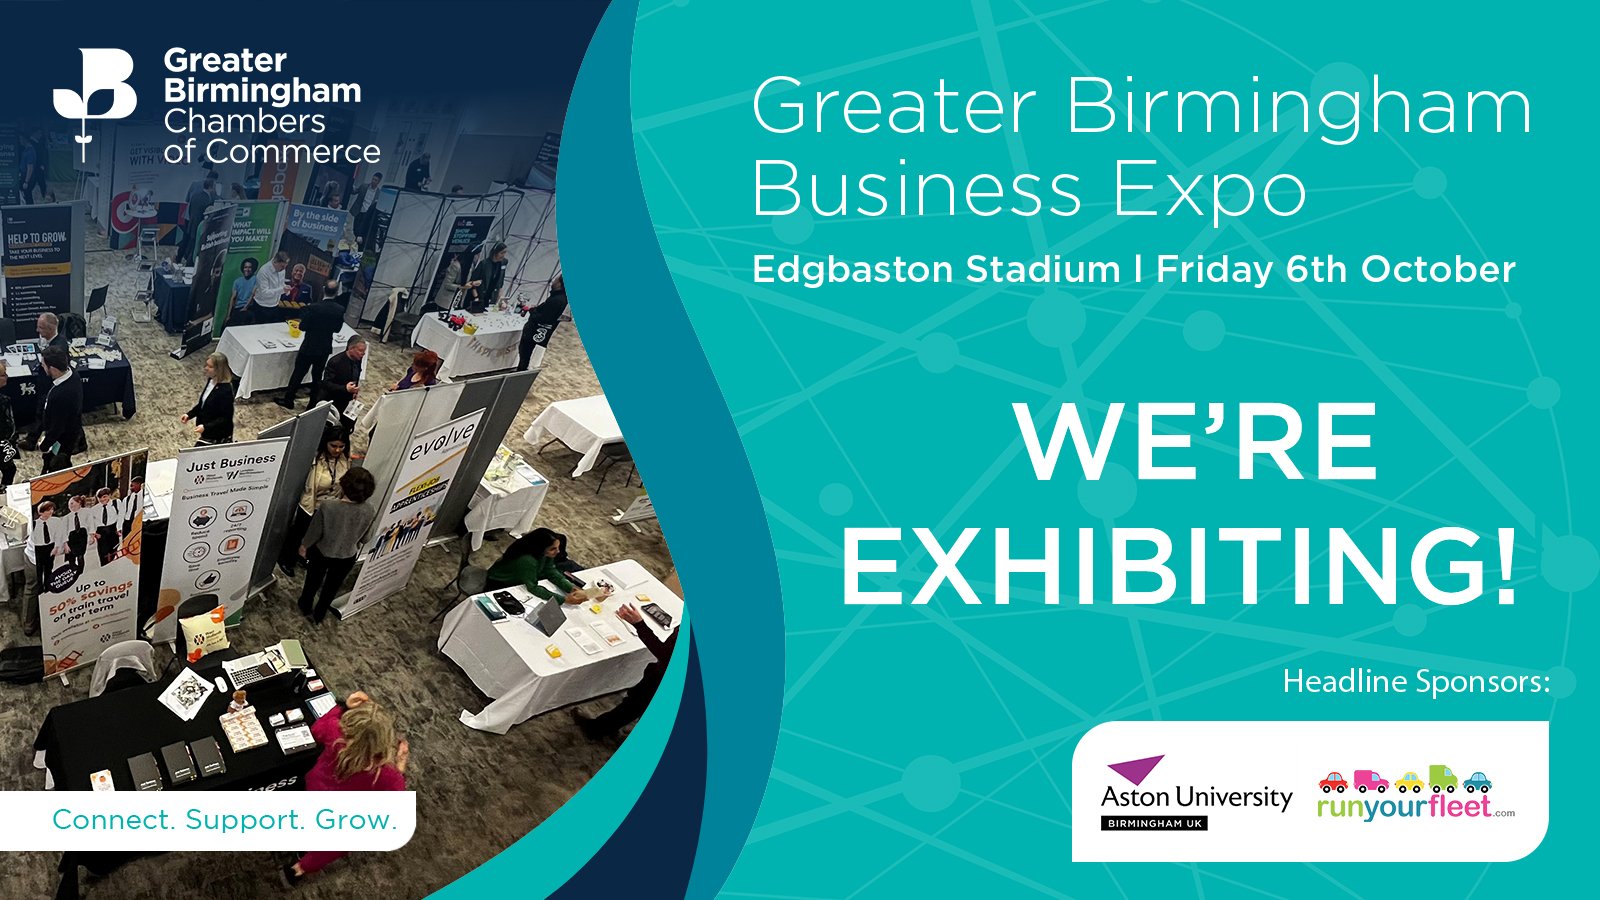 CPiO is exhibiting at The Greater Birmingham Business Expo 2023